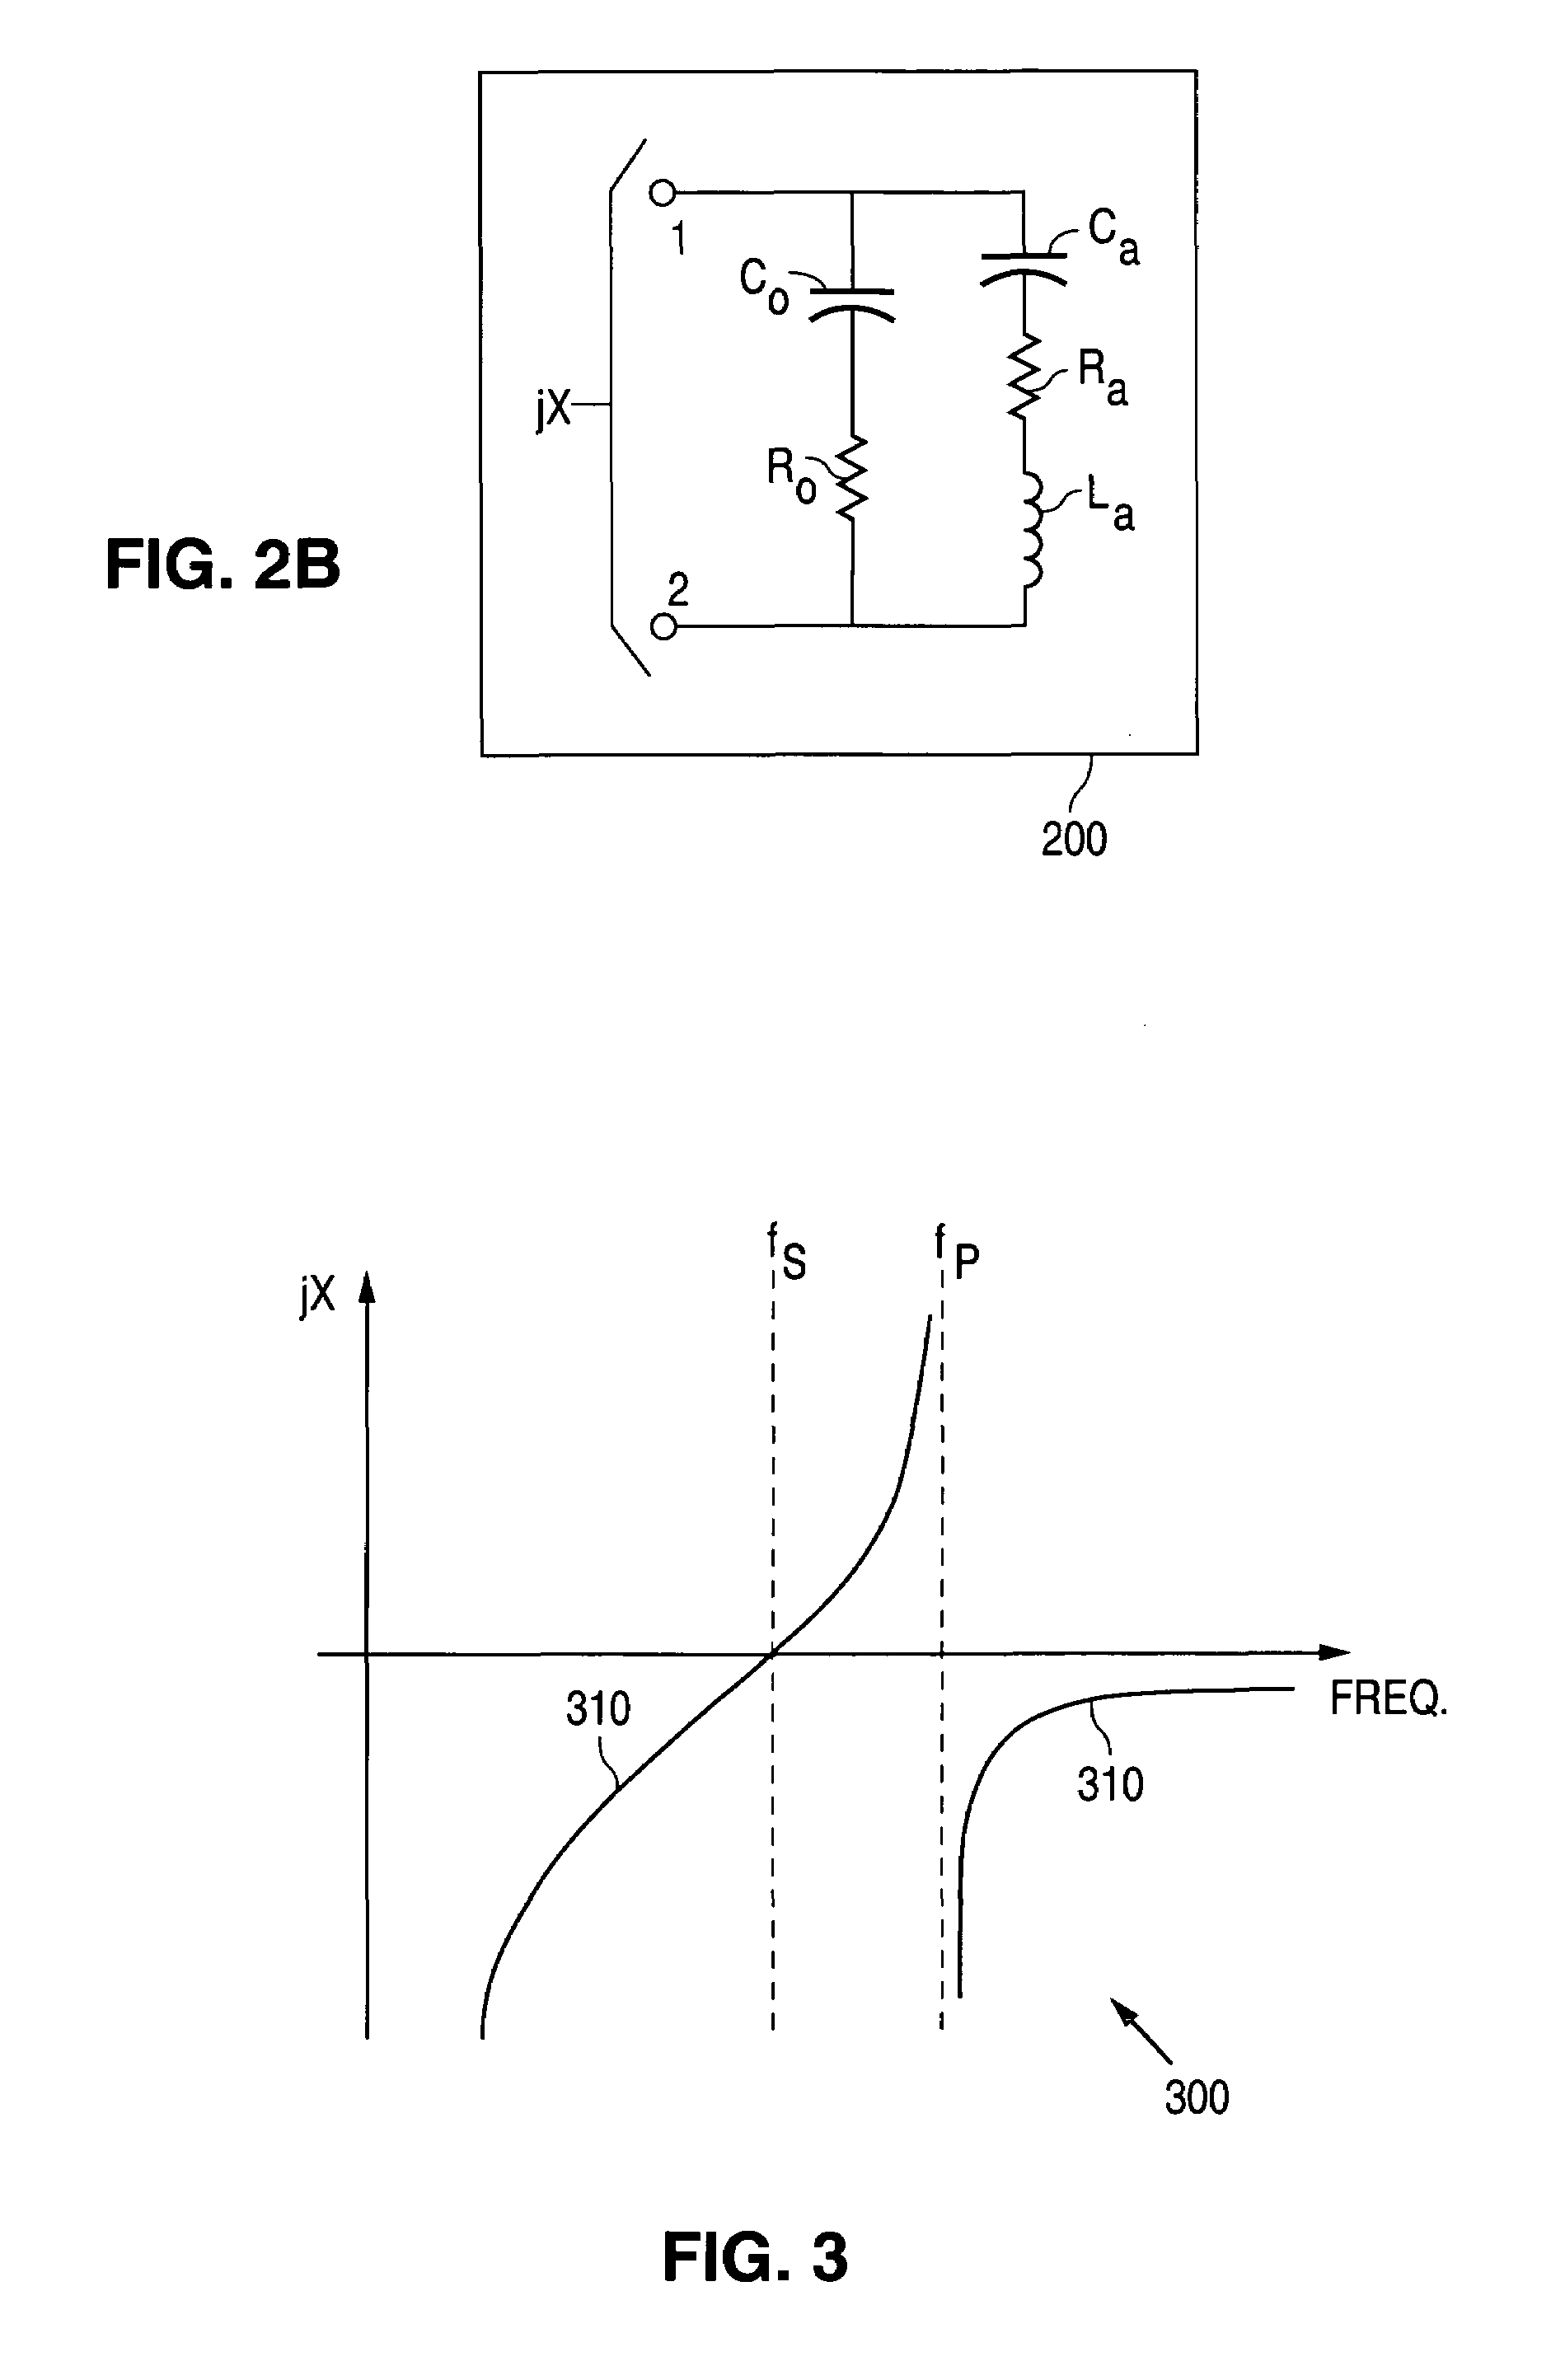 Apparatus and method for extending tuning range of electro-acoustic film resonators